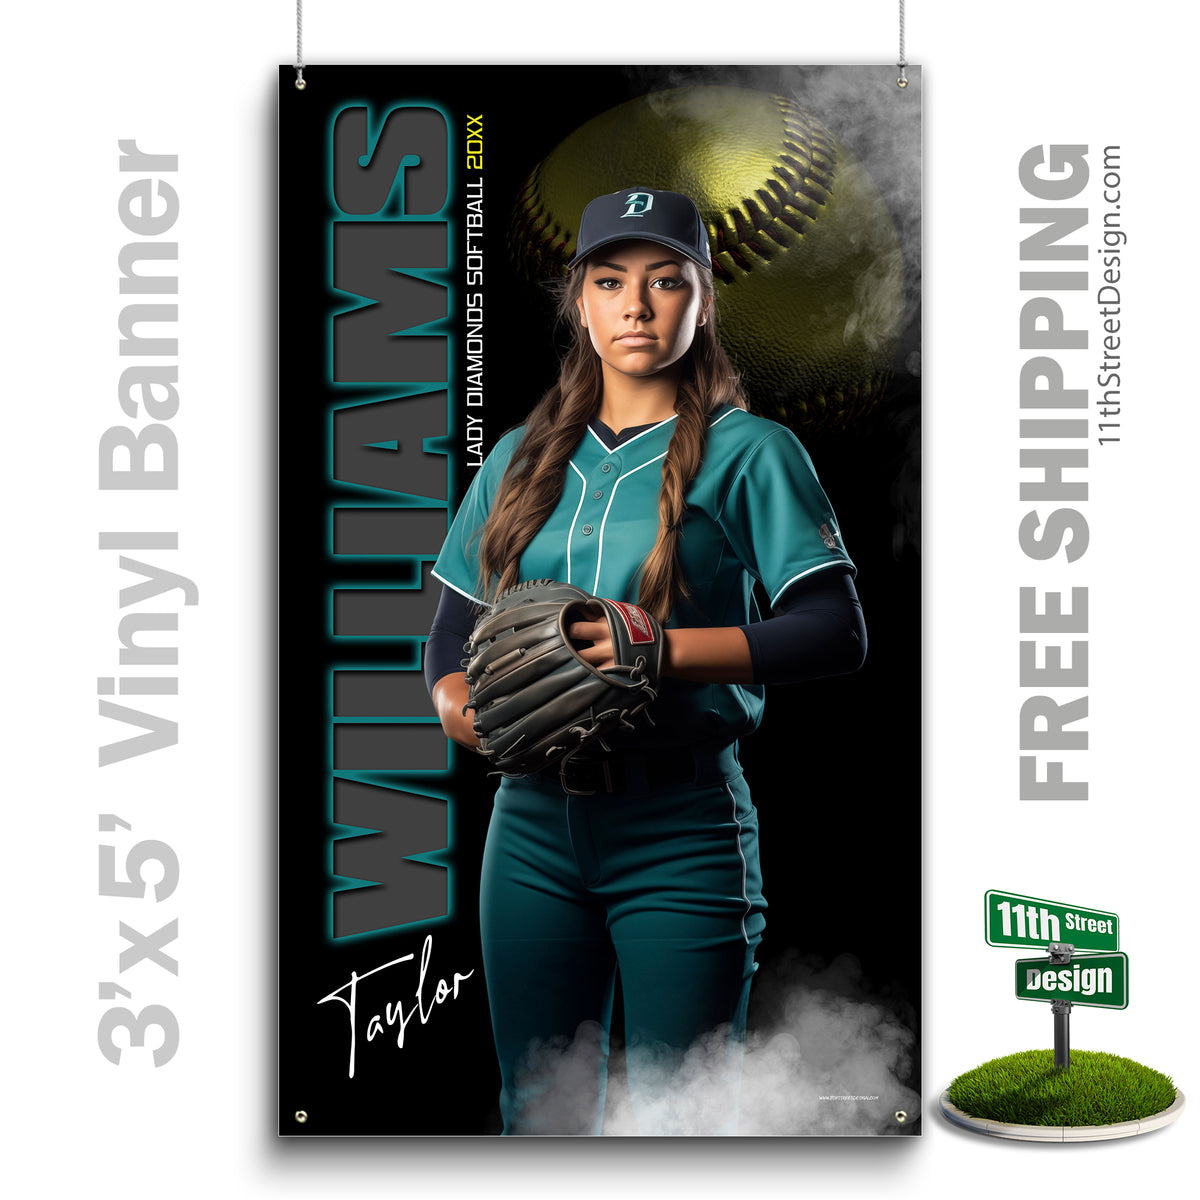 Coaches Gift, Team Gifts, Poster Print, Personalized Poster, Senior Night, Senior Poster, Sport Gift, Sports Collage, Sports Prints, Custom Sports Poster, Softball Poster, Softball Print, Softball Senior,